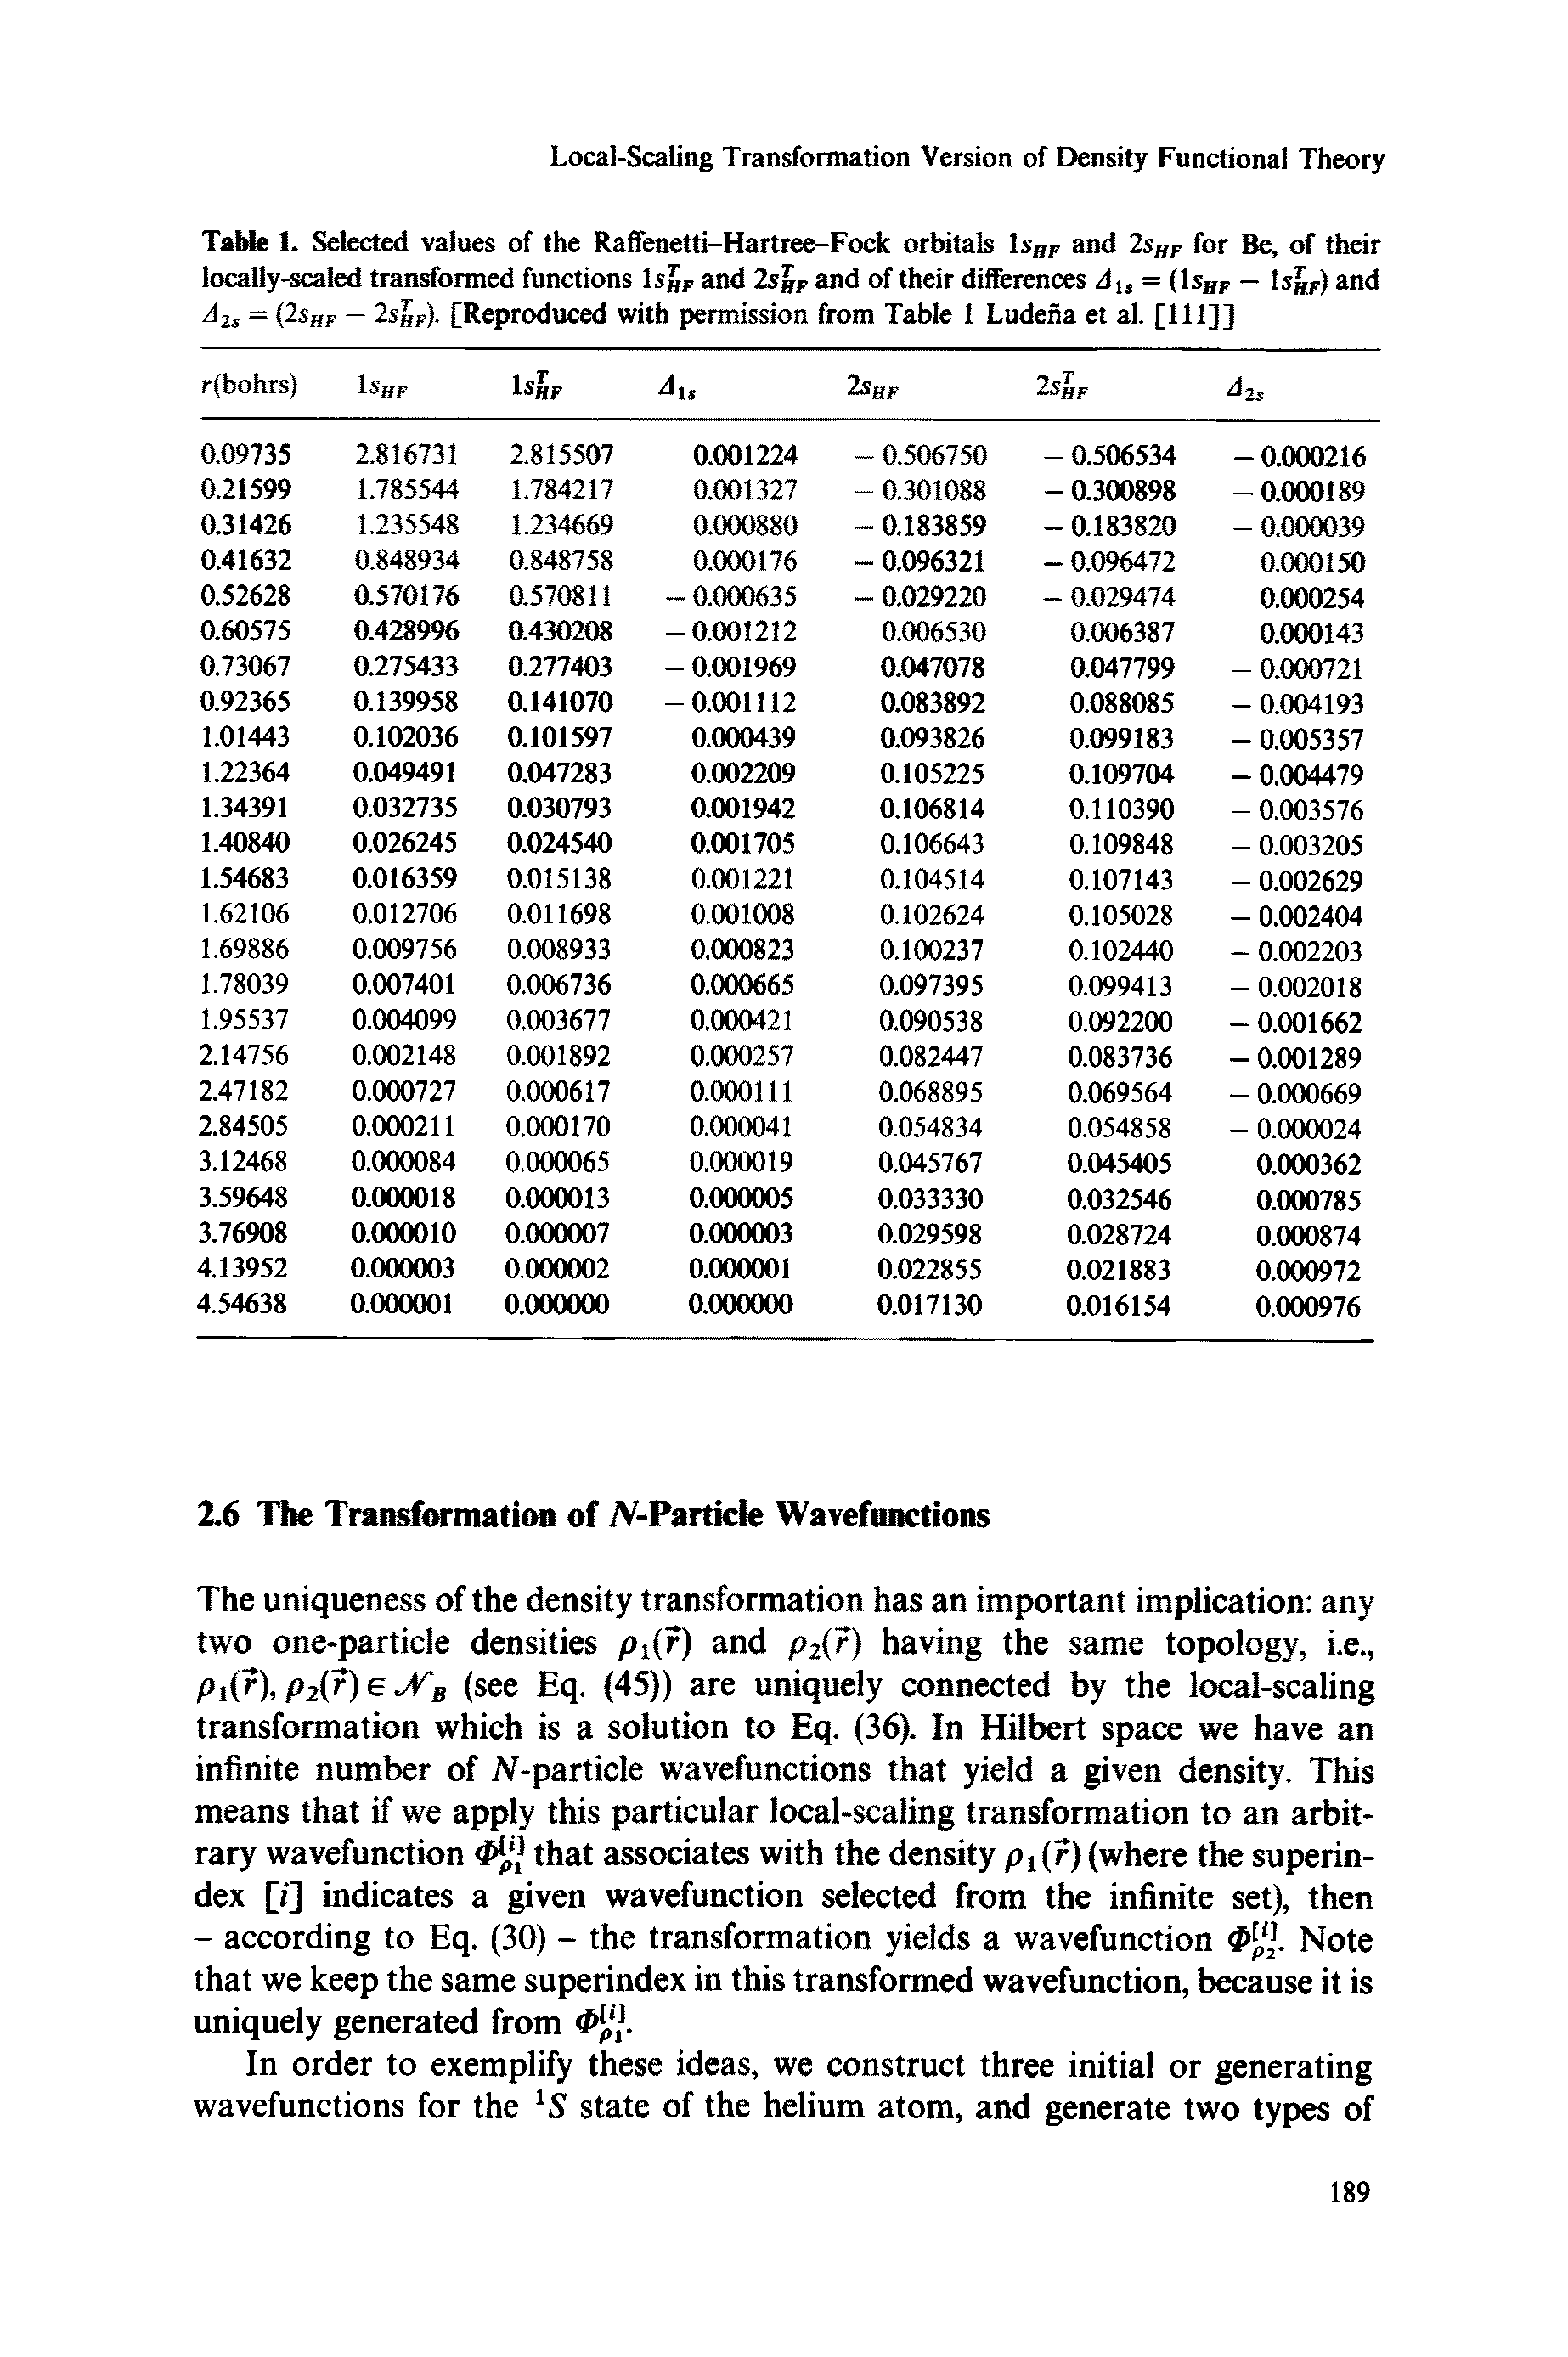 Table I. Selected values of the Raffenetti-Hartree-Fock orbitals Isg and 2shf for Be, of their locally-scaled transformed functions IsJ, and 2sgr and of their differenees di, = Ish, - Isgj,) and = (2siif — 2sgp). [Reproduced with permission from Table I Ludeiia et al. [Ill]]...